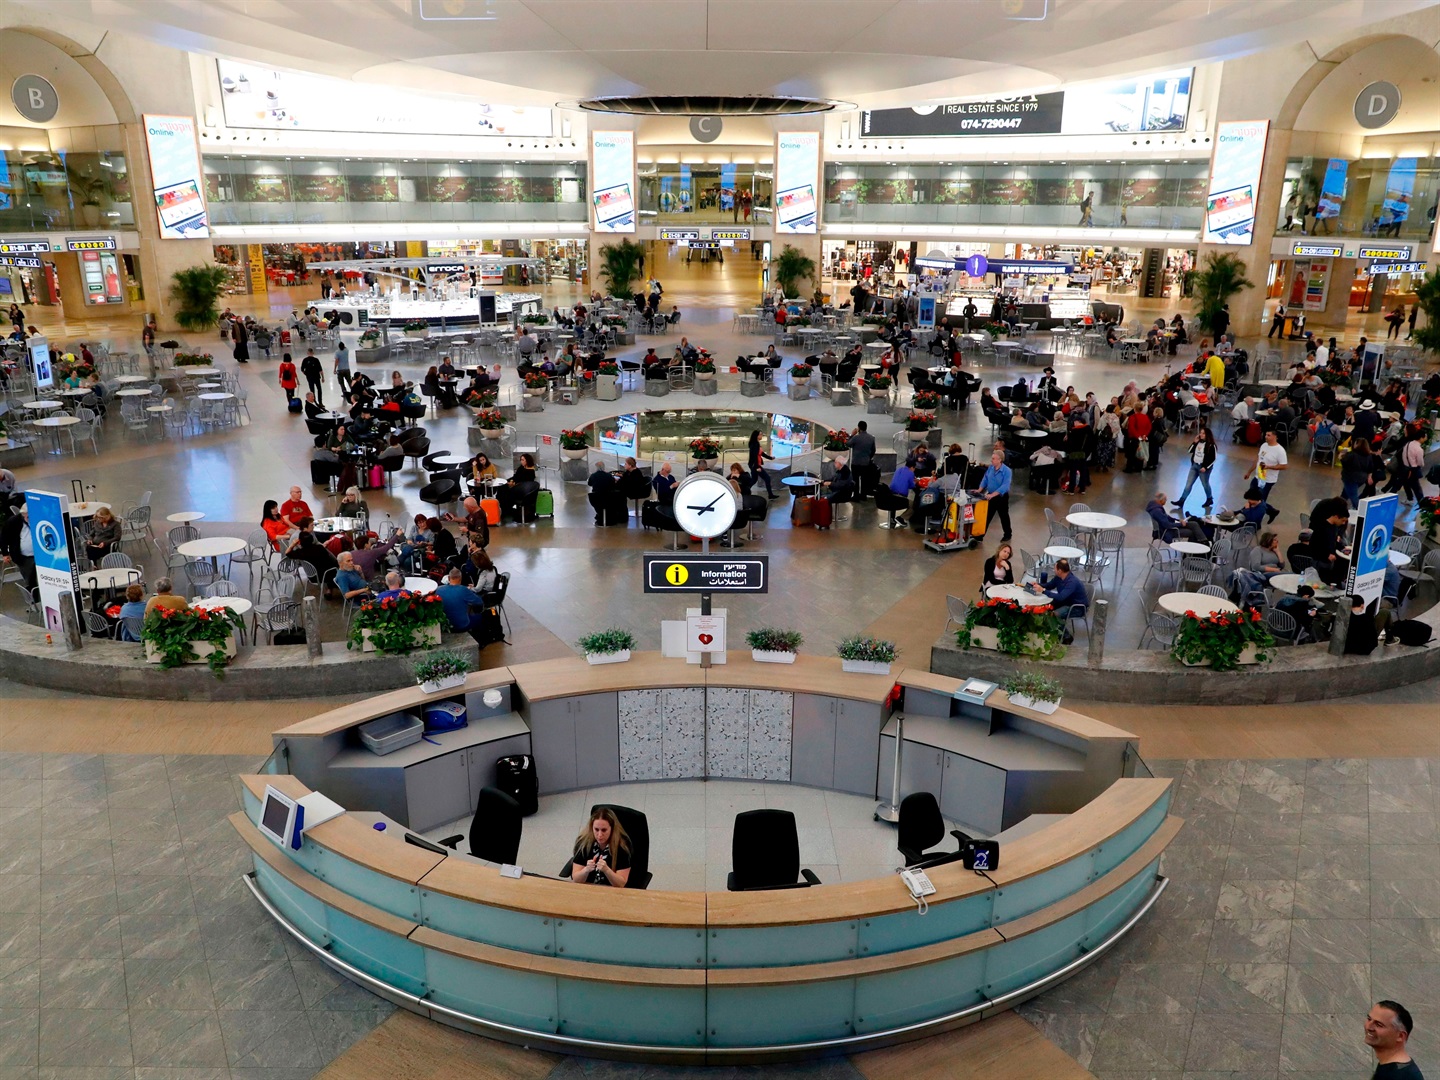 Businessinsider.co.za | Parents late to their flight at an Israeli airport left their baby at check-in, authorities say